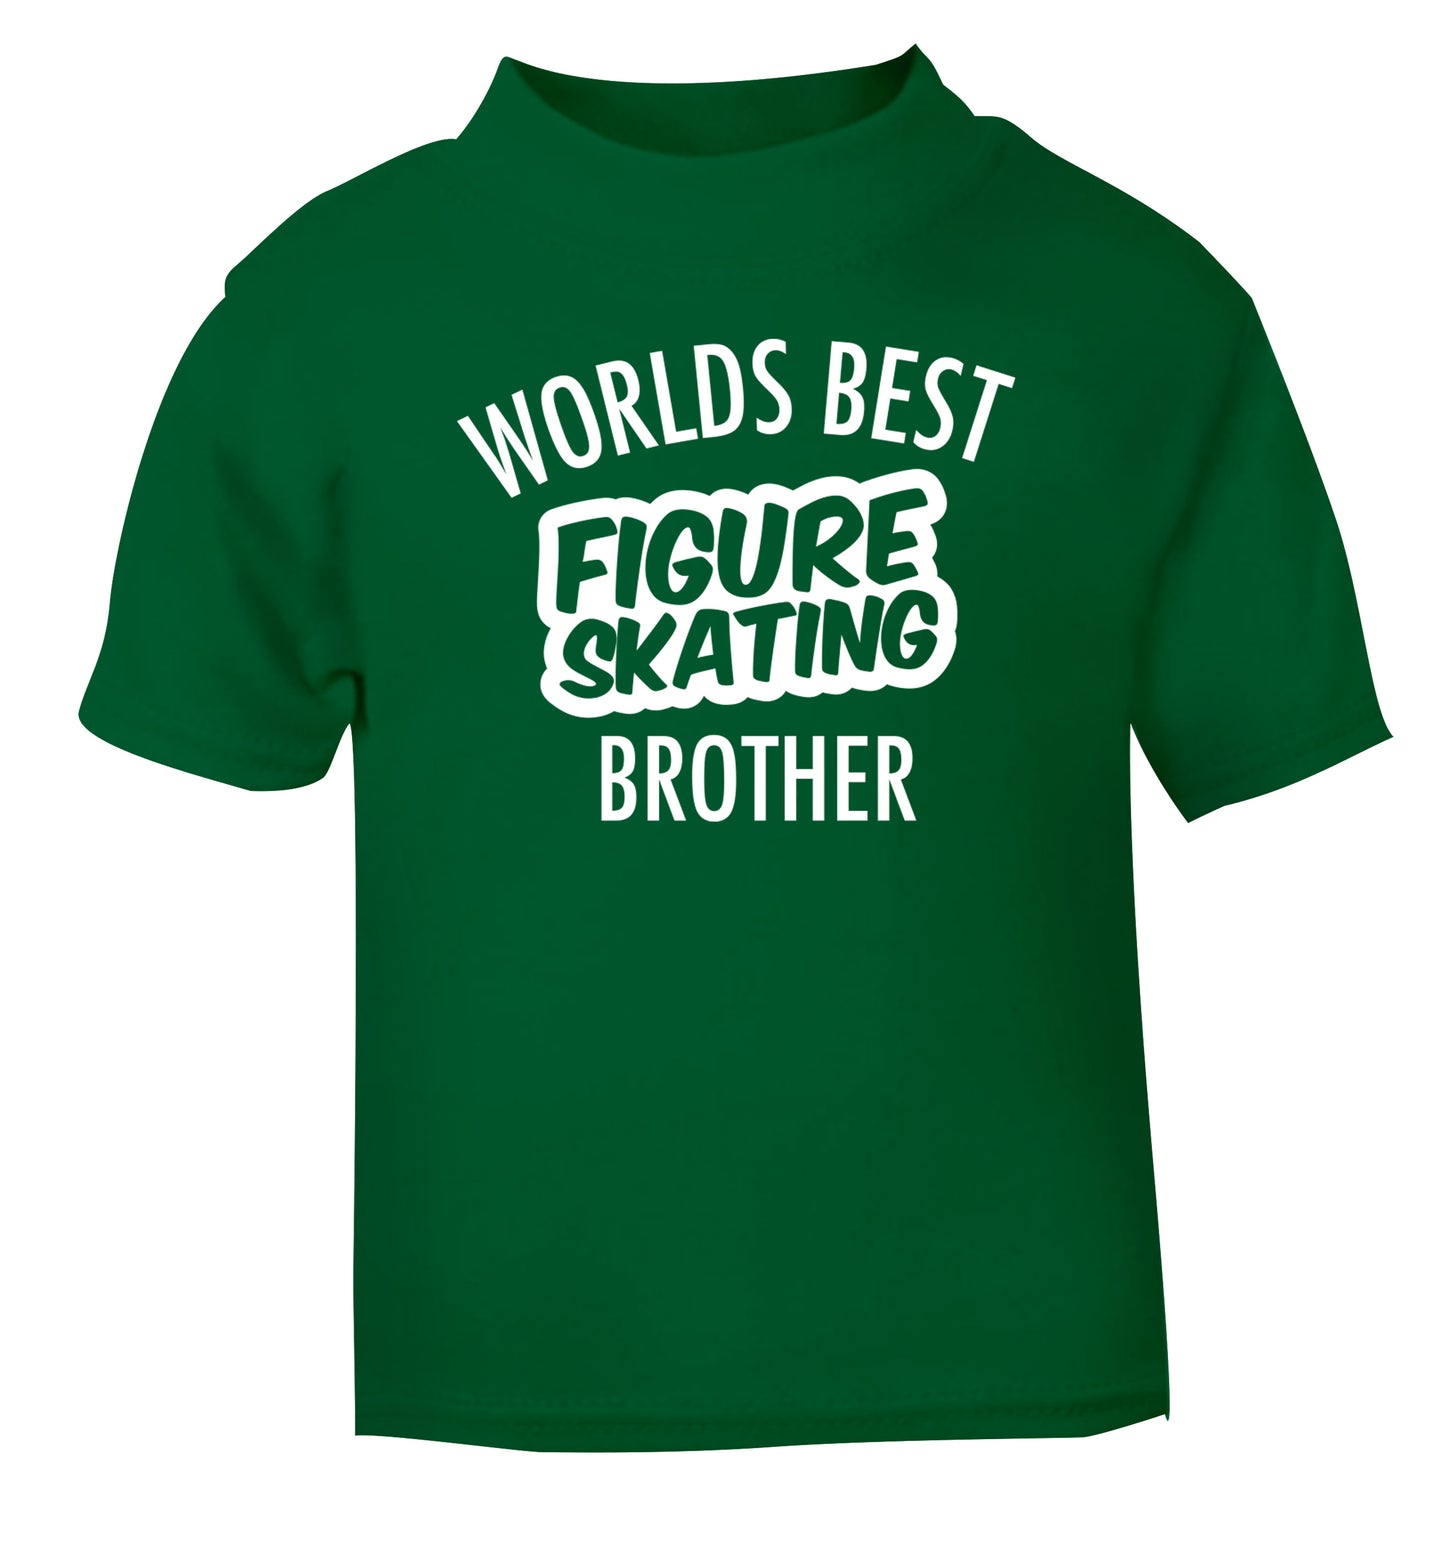 Worlds best figure skating brother green Baby Toddler Tshirt 2 Years